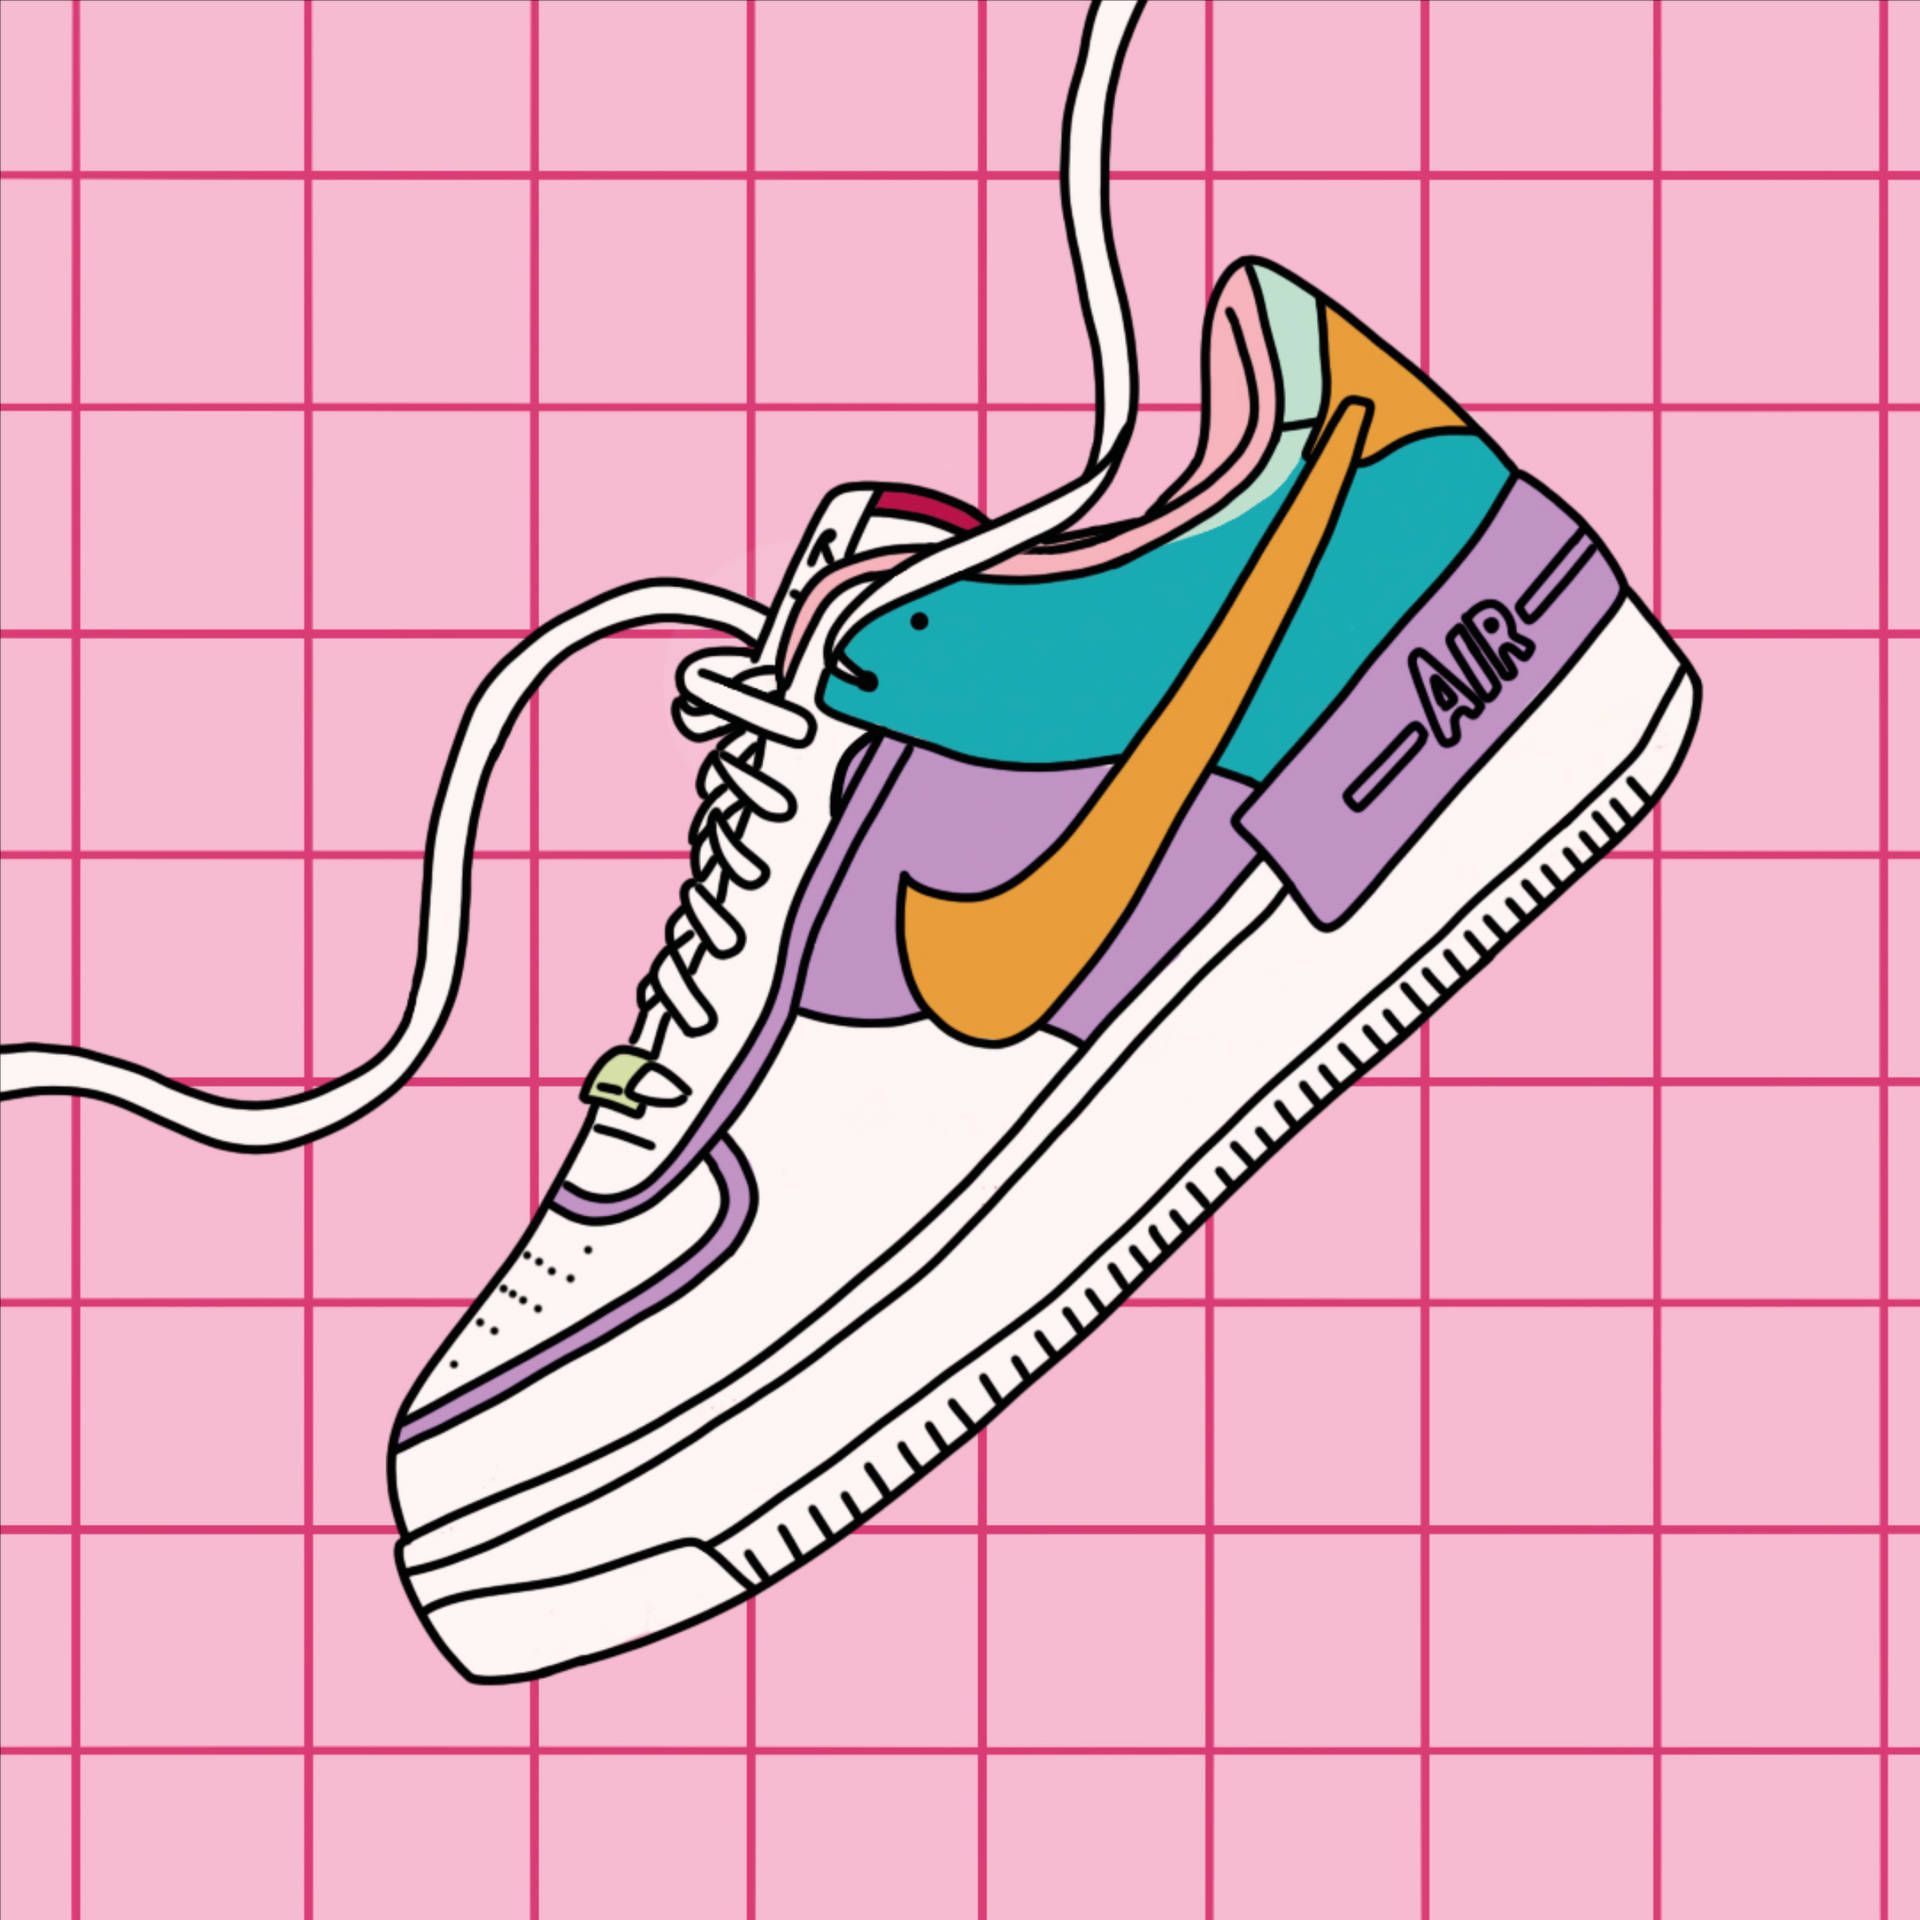 An illustration of a pair of Nike Air Force 1 sneakers on a pink grid background - Shoes, Nike